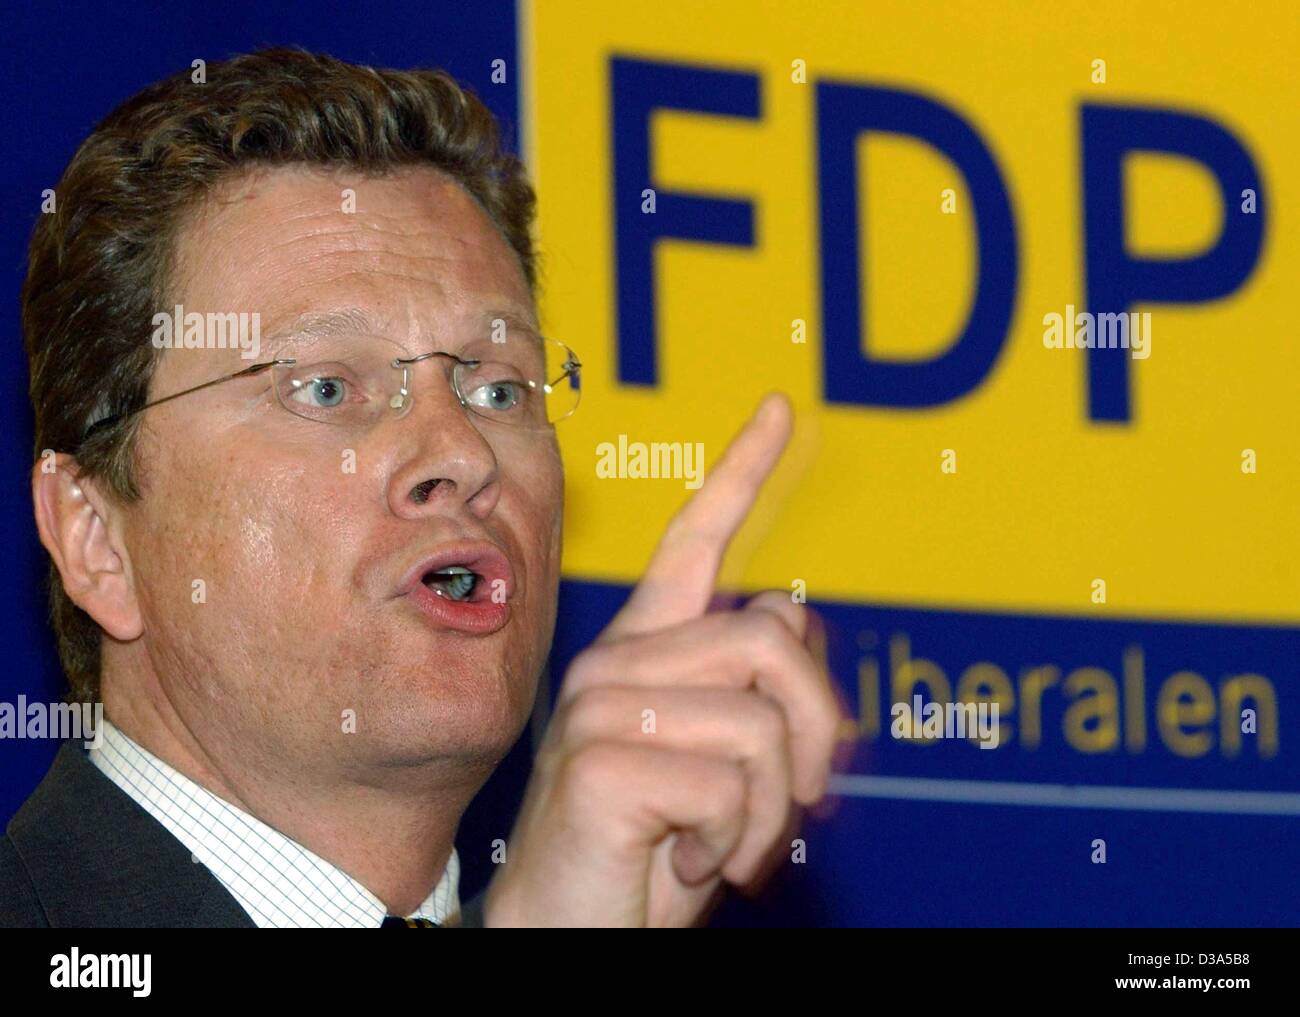 (dpa) - Guido Westerwelle, Chairman of the German liberal party FDP, speaks in front of his party's logo at a party meeting in Passau, Germany, 13 February 2002. In the general elections on 22 September 2002 Westerwelle is running for chancellor, which makes him the first chancellor candidate in the Stock Photo